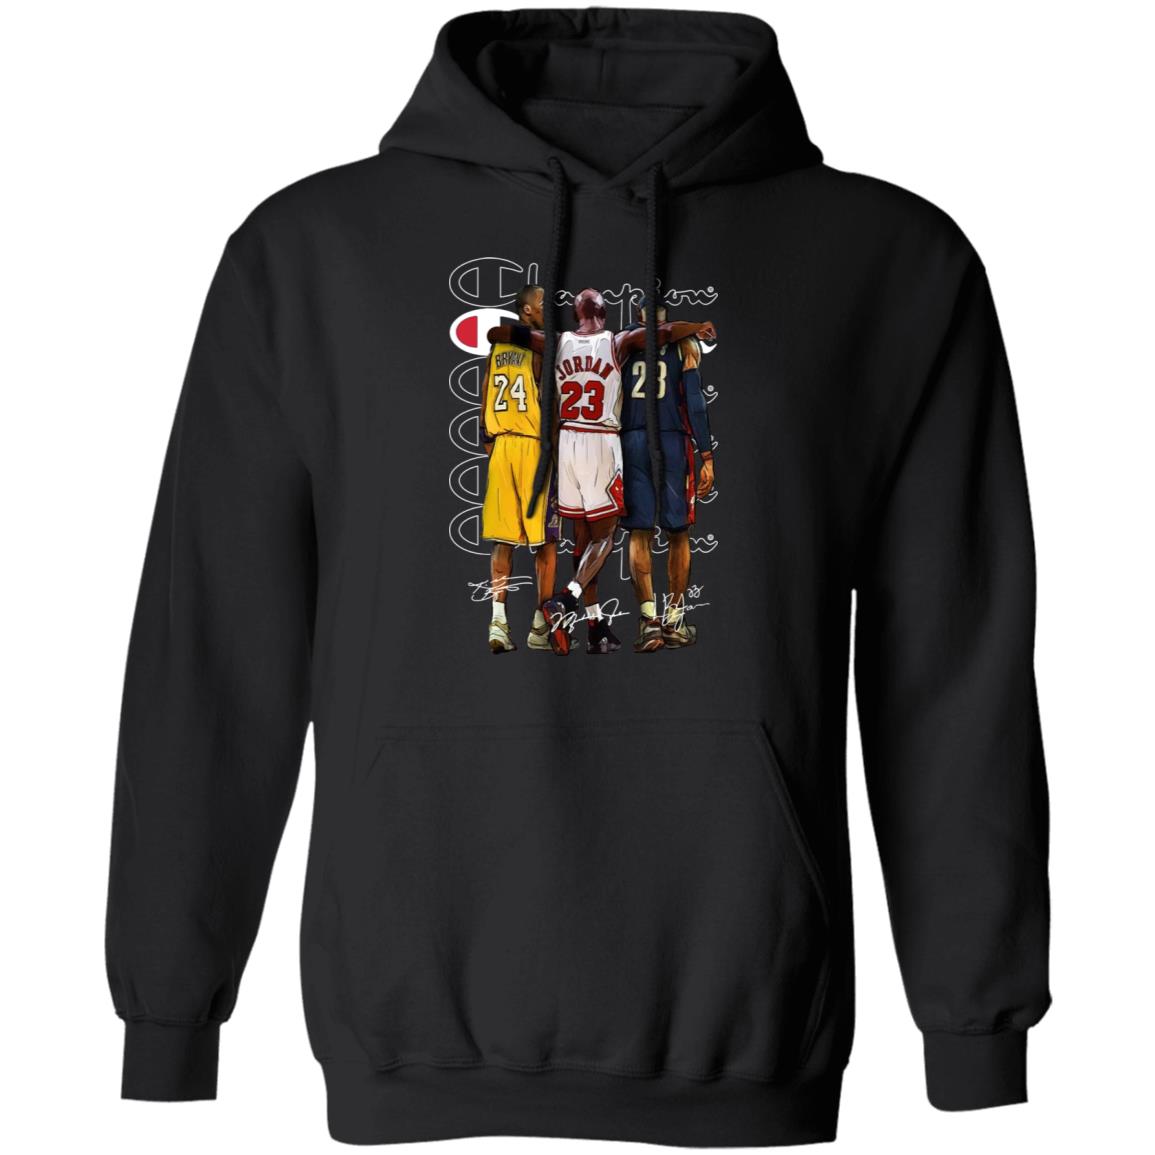 Nba Legends Champion Kobe Bryant Michael Jordan And Lebron James T Shirt  Hoodie Tank Top Size Up To 5xl, hoodie, sweater, long sleeve and tank top